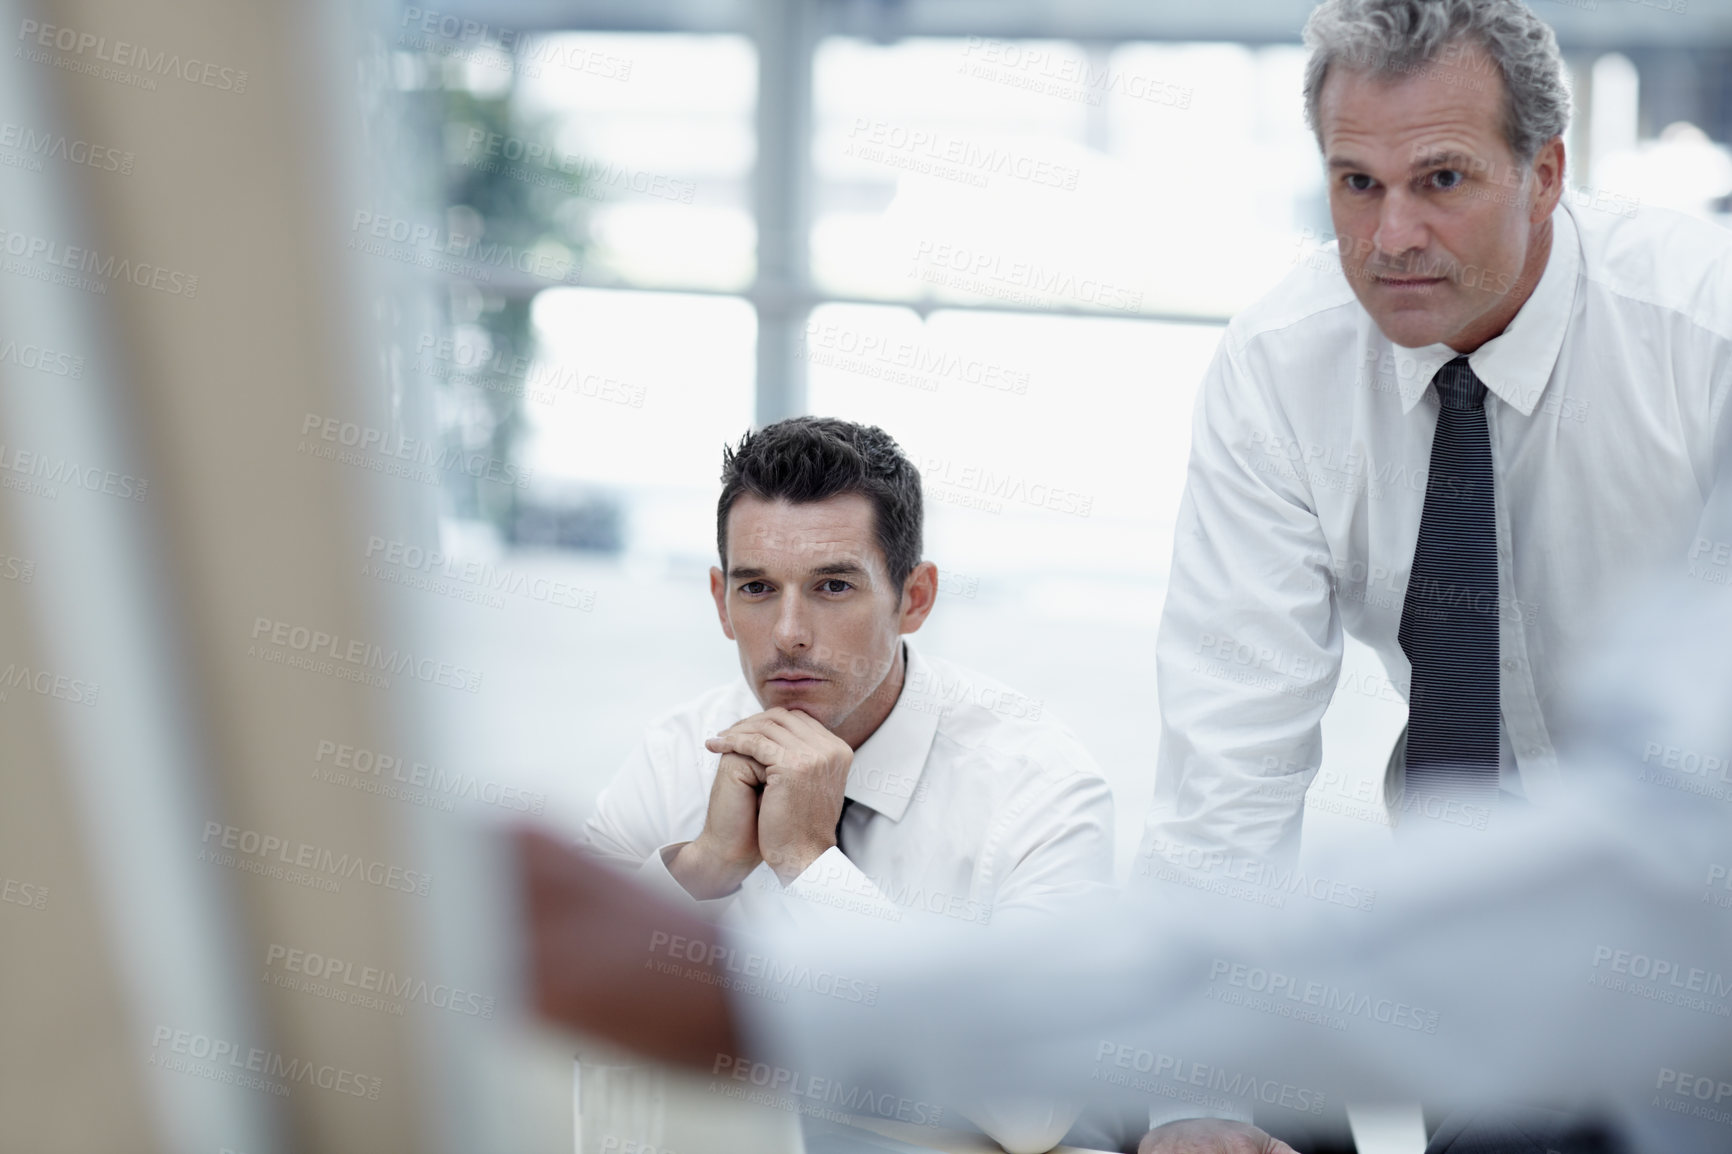 Buy stock photo Businessmen watch as a colleague delivers a presentation on a flipchart